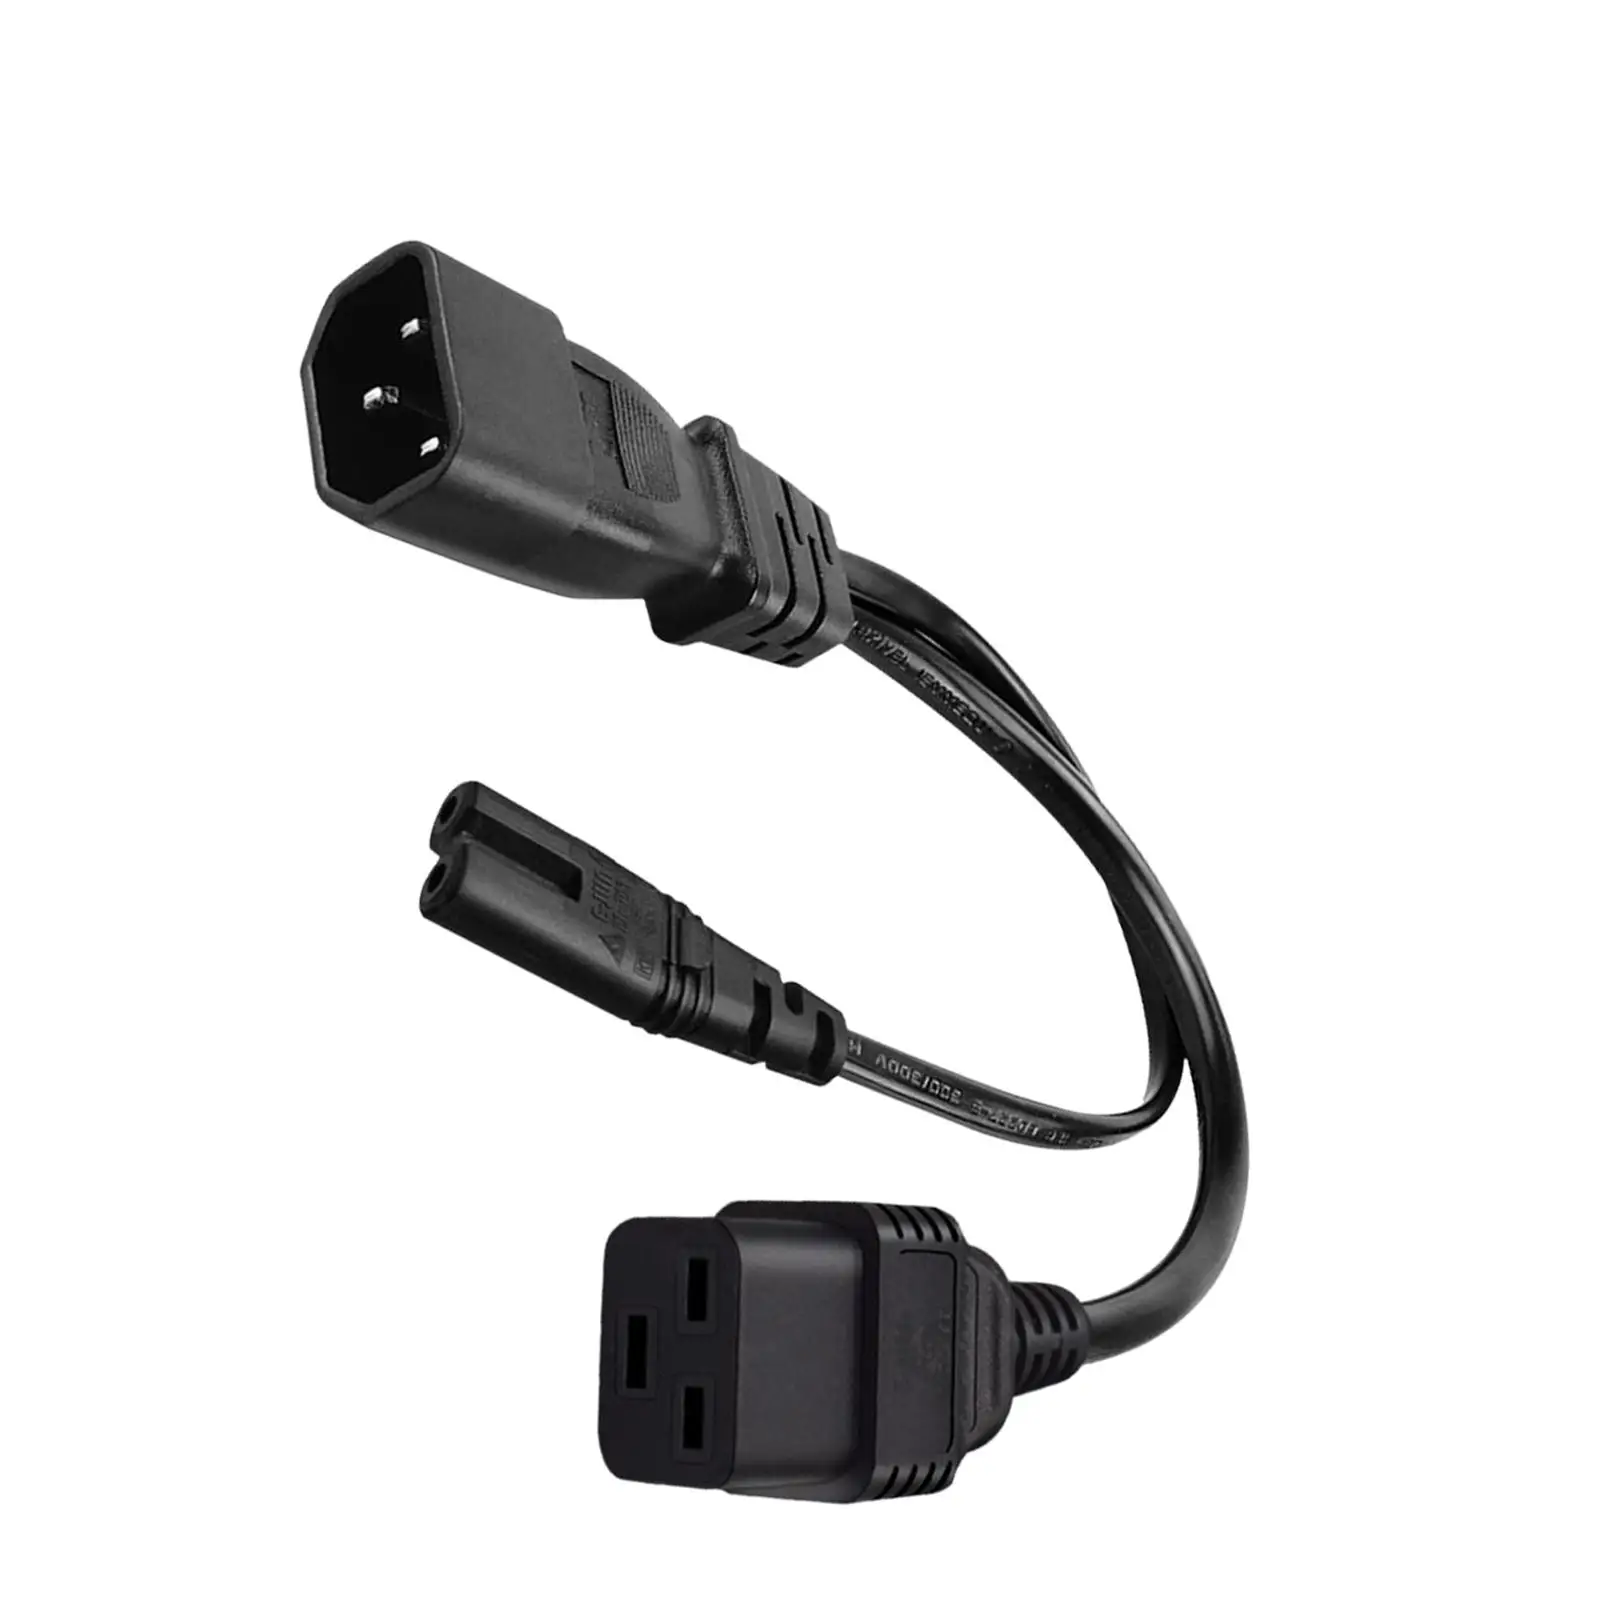 C14 Male to C7 Female Convertor Cord Extension Cord Stable Transmission C14 to C7 Power Cable